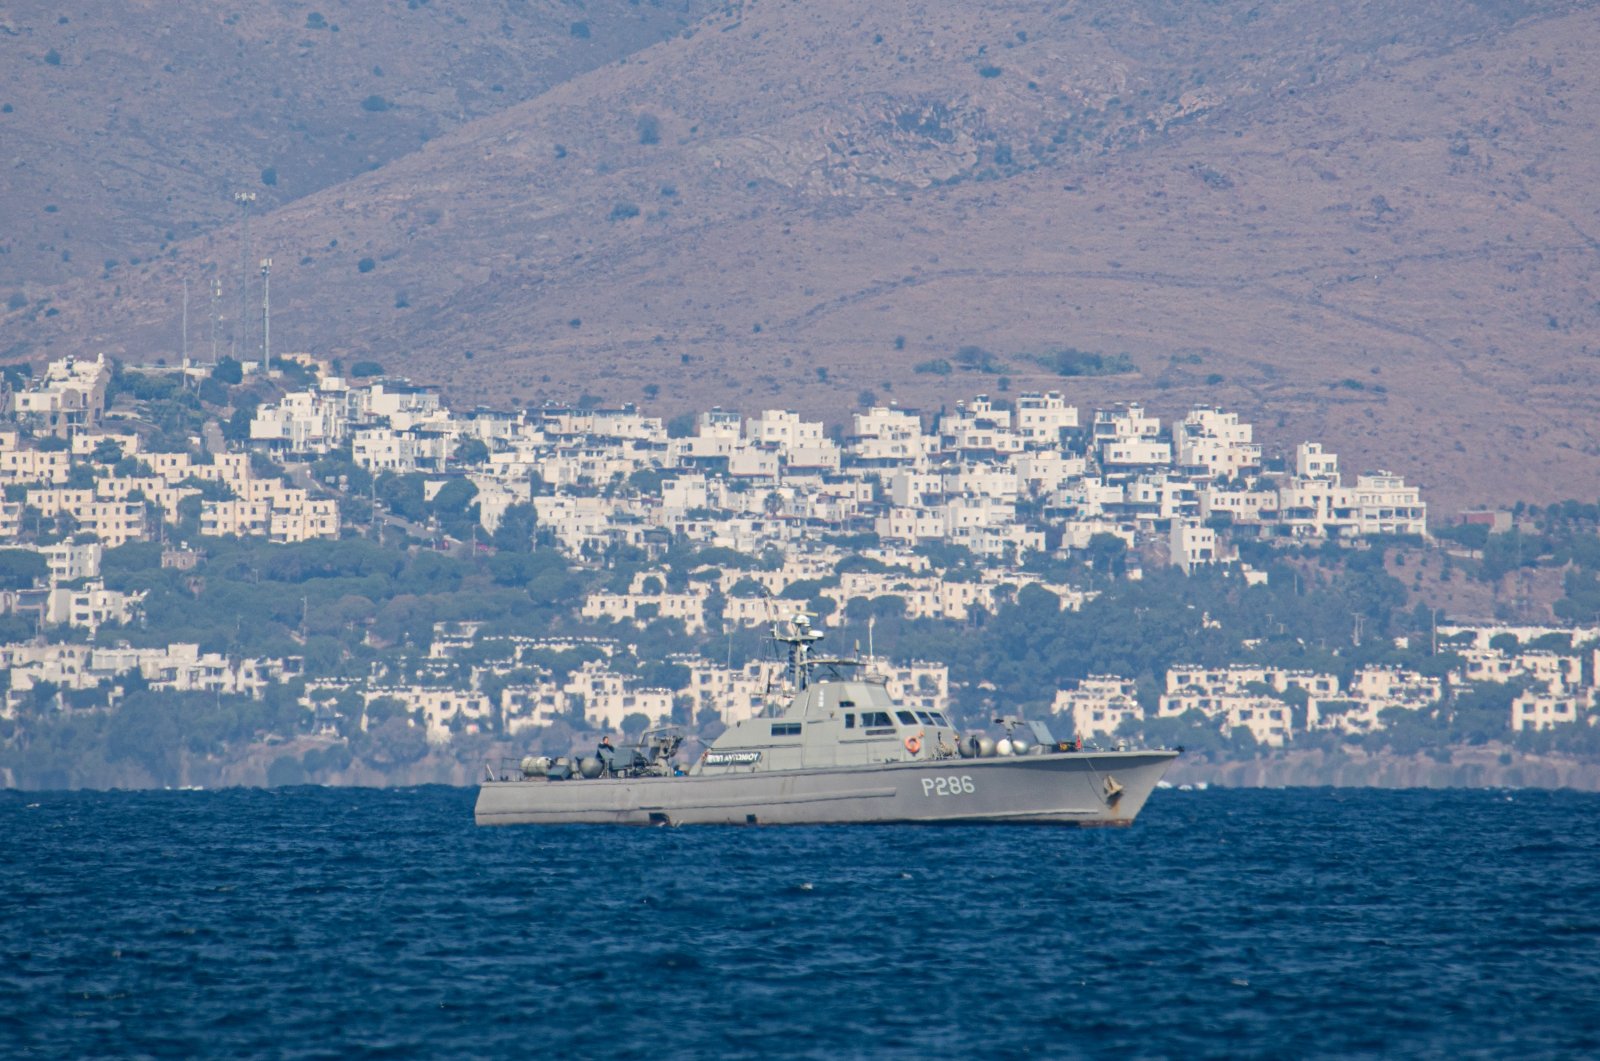 A Greek patrol ship of the Hellenic Navy is patrolling the Aegean Sea water borders between Greece and Turkey, just outside Kos Island with Turkey in the background with summer houses, resorts and hotels visible. Nov. 16, 2021 (AFP File Photo)